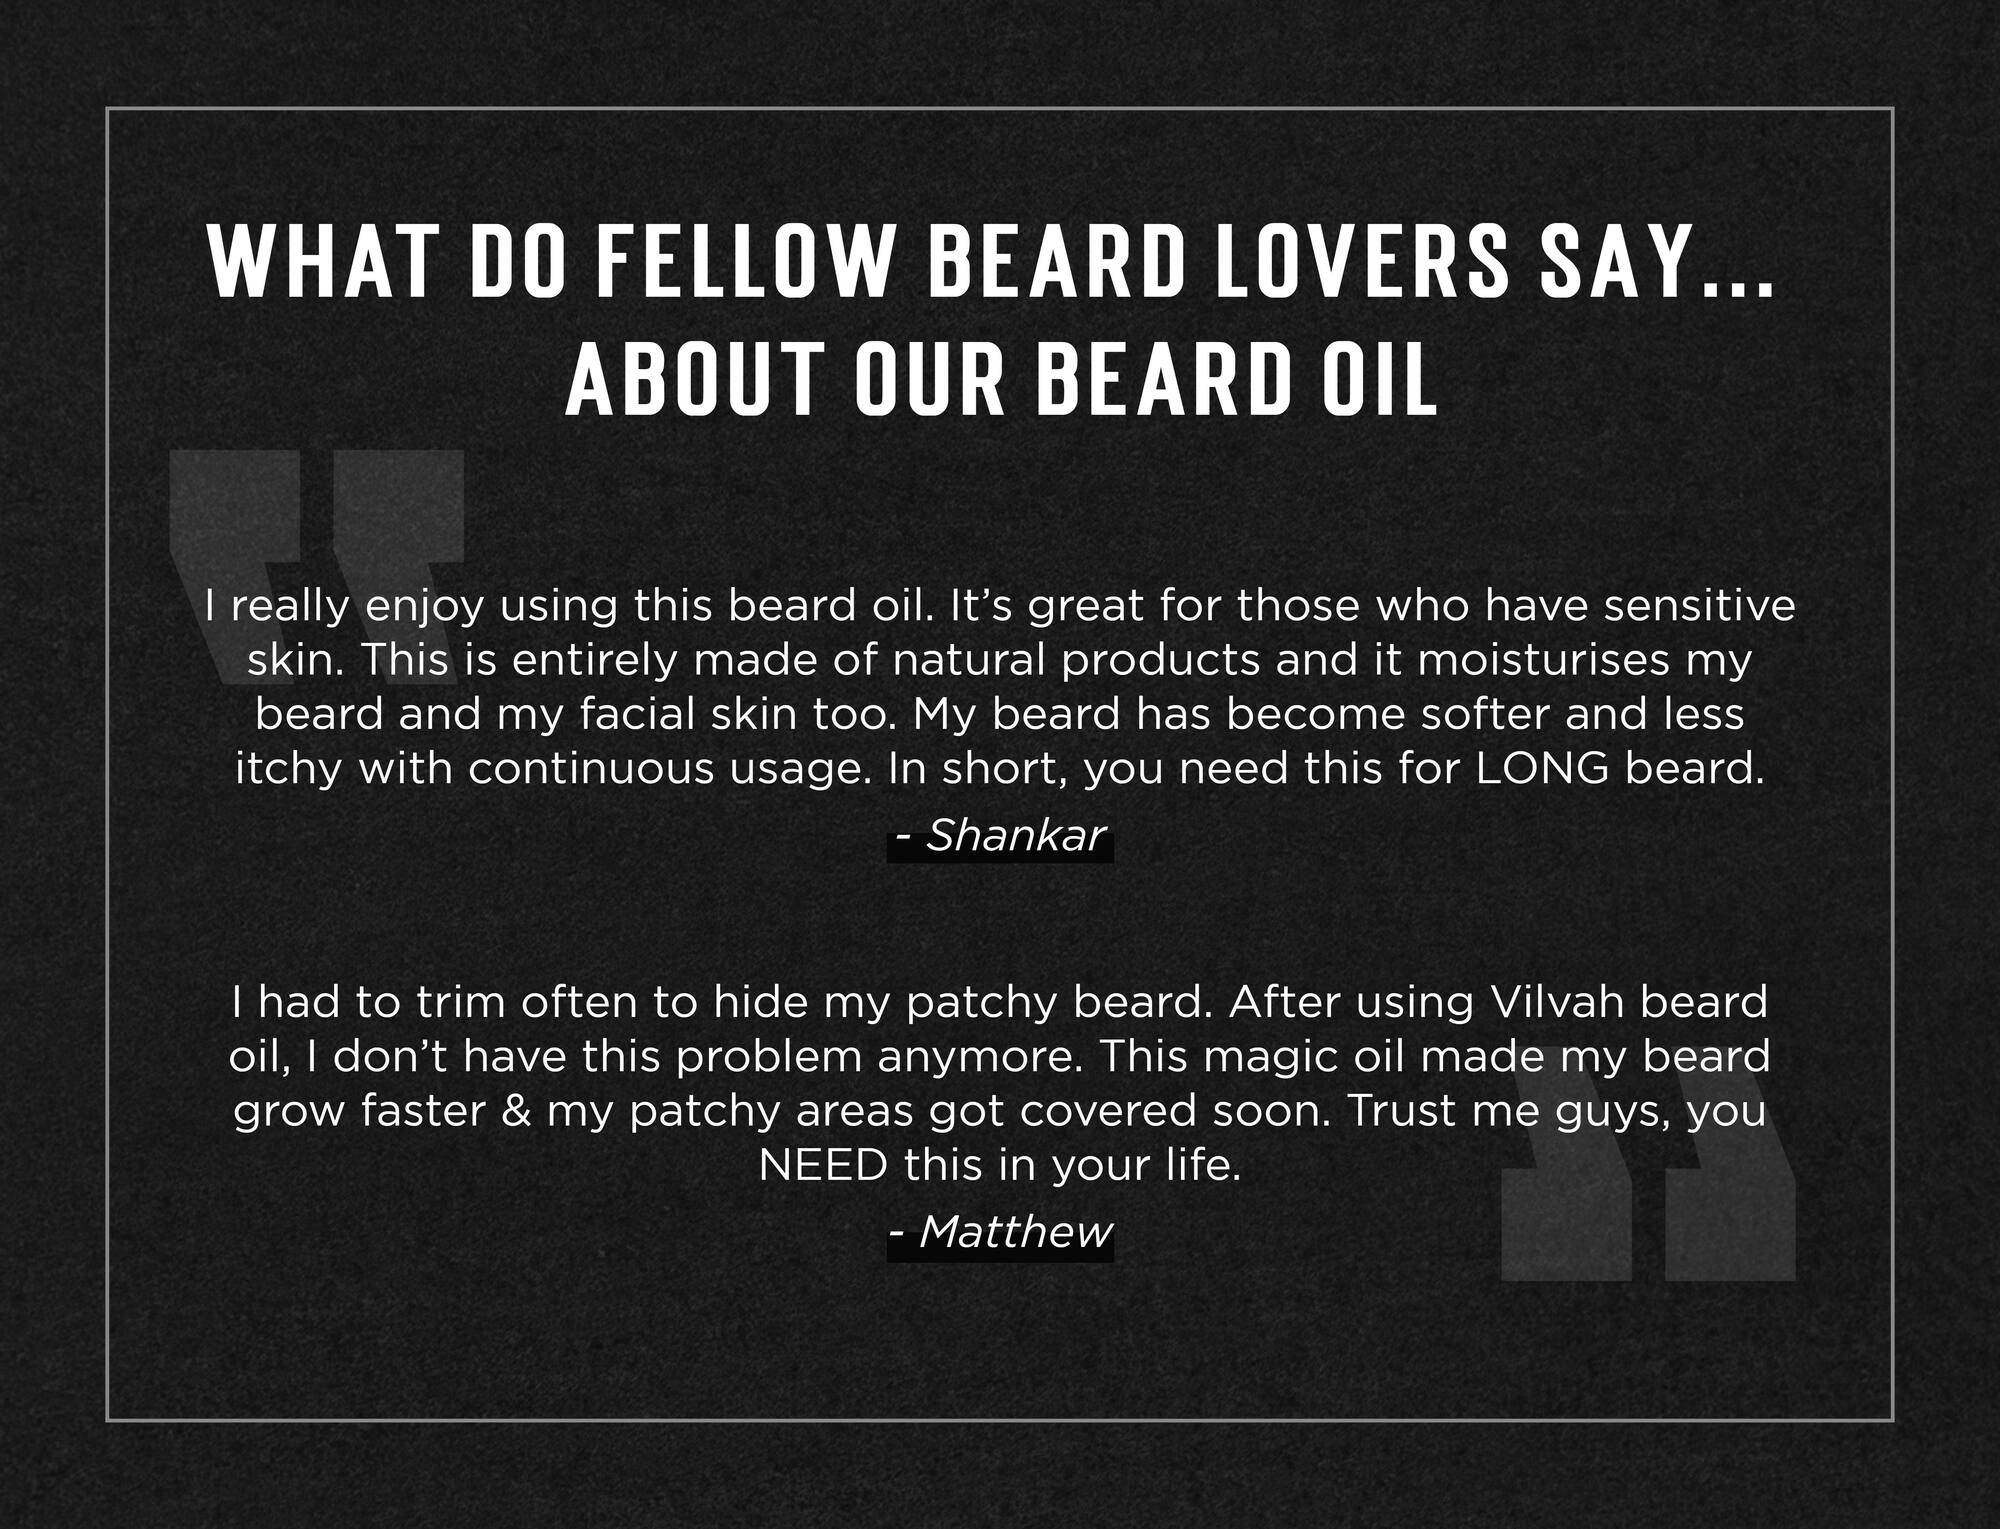 WHAT DO FELLOW BEARD LOVERS SAY... ABOUT OUR BEARD OIL really enjoy using this beard oil. Its great for those who have sensitive dla al Sims all as Nan ats osiey mm at-140l c cefoUeincm-alom ium ante cide disistom aang beard and my facial skin too. My beard has become softer and less Kel aNVAnAVALd alex ale alULelU im Ulsr-leloal alssjaveaummol0al-1e mua ice al M@i Gm ol-'-1cem - Shankar Mat-lemKomualaameiasamcom alle lm aalal oy-1Kel anval oX1-1 ce y- Vans aUIcI ale MAYA AY all elsx- ae, ro Mal ele alae at-hY-mndalicm ge elaalt-lanysanrela-mmmalicmant-le ome maat-lel-m nana el-t-ce grow faster my patchy areas got covered soon. Trust me guys, you NEED this in your life. - Matthew 